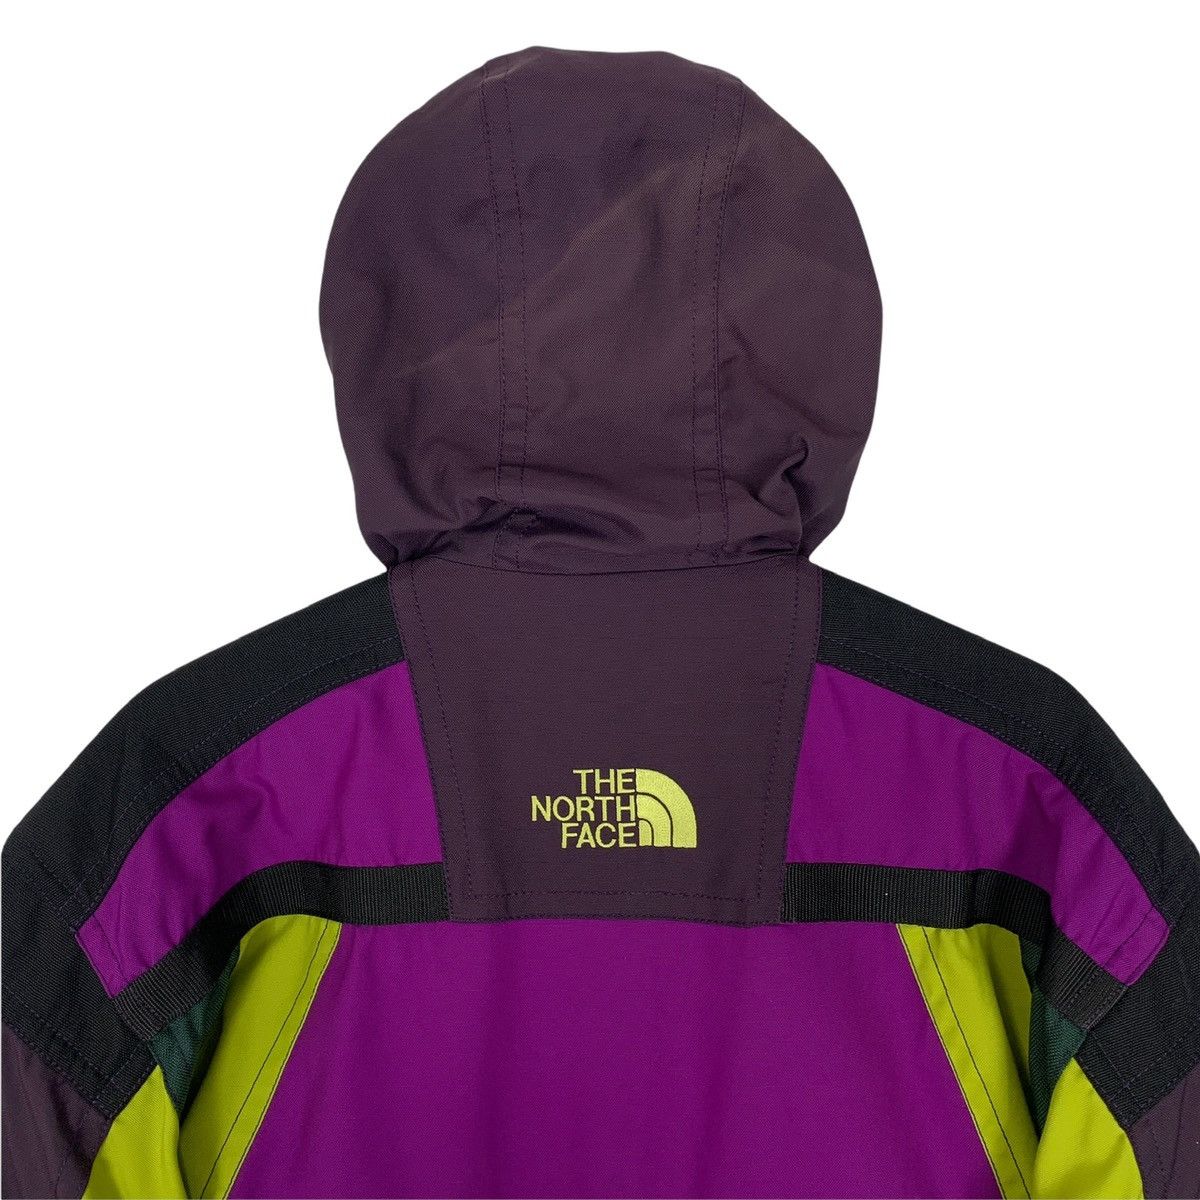 The North Face Color Block Winter Jacket - 6